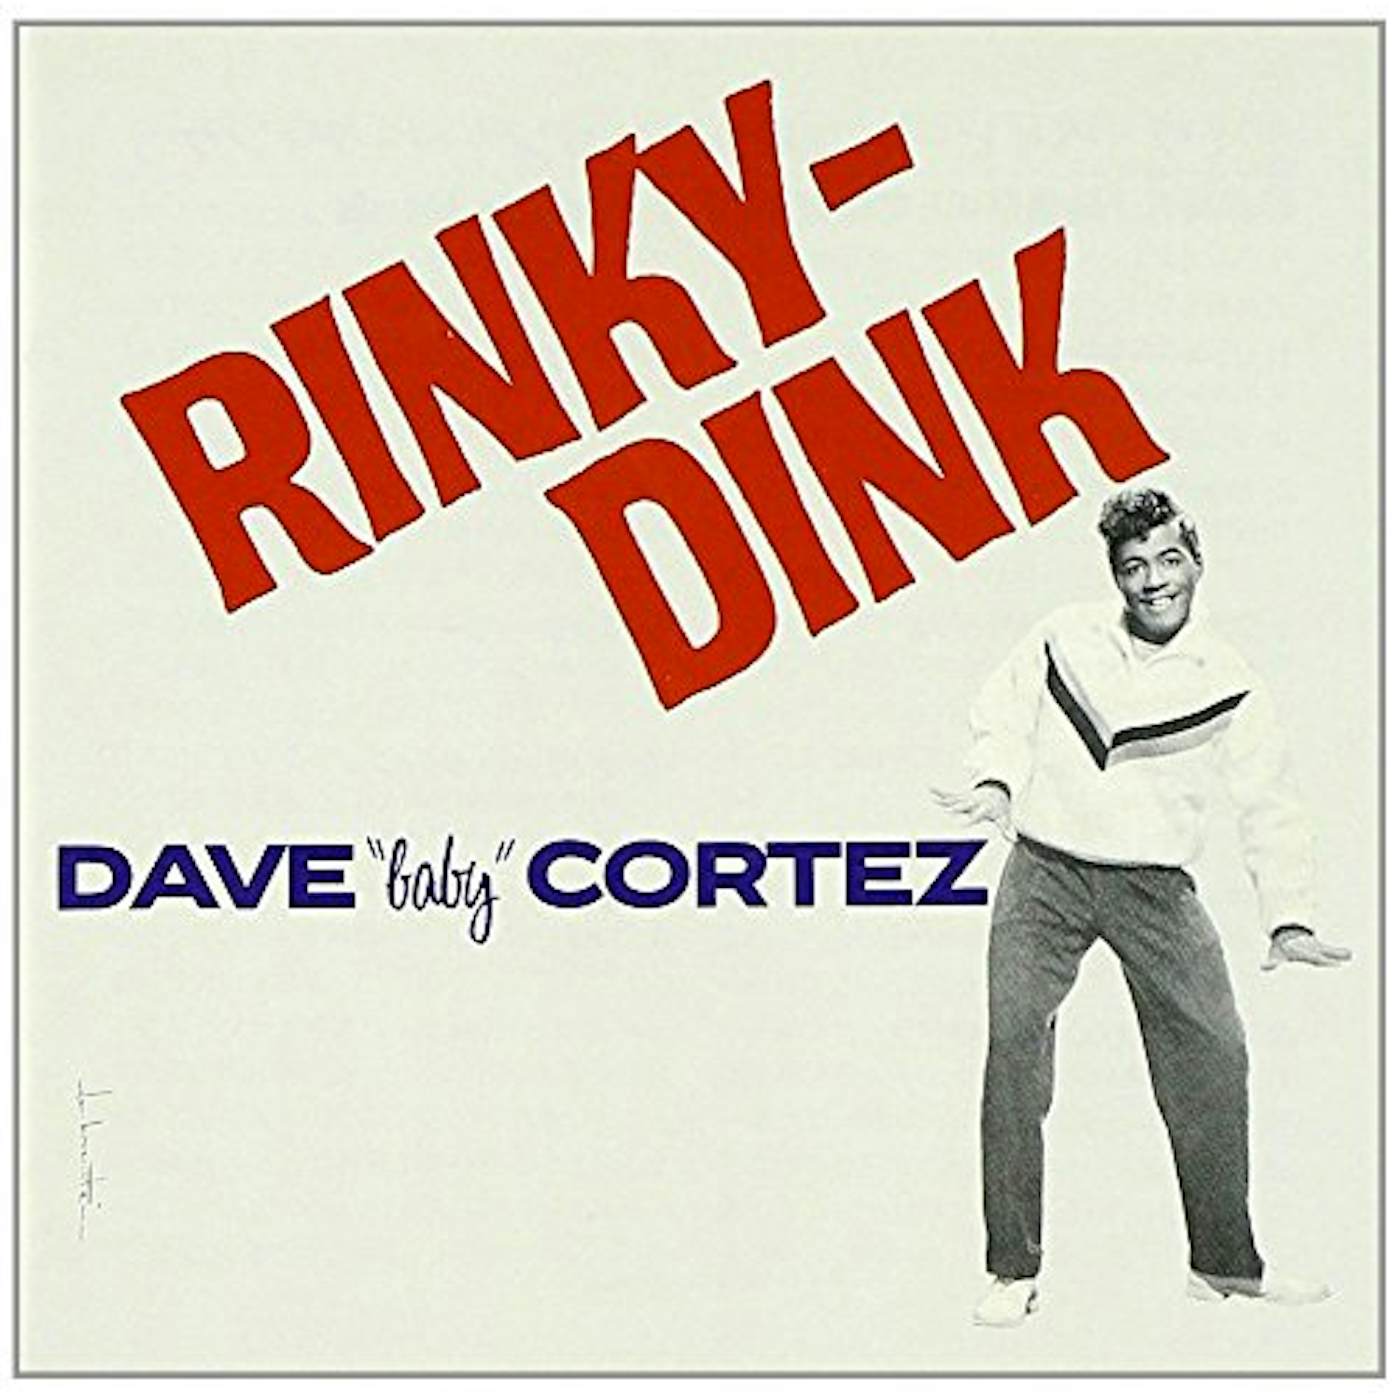 Dave "Baby" Cortez RINKY DINK CD